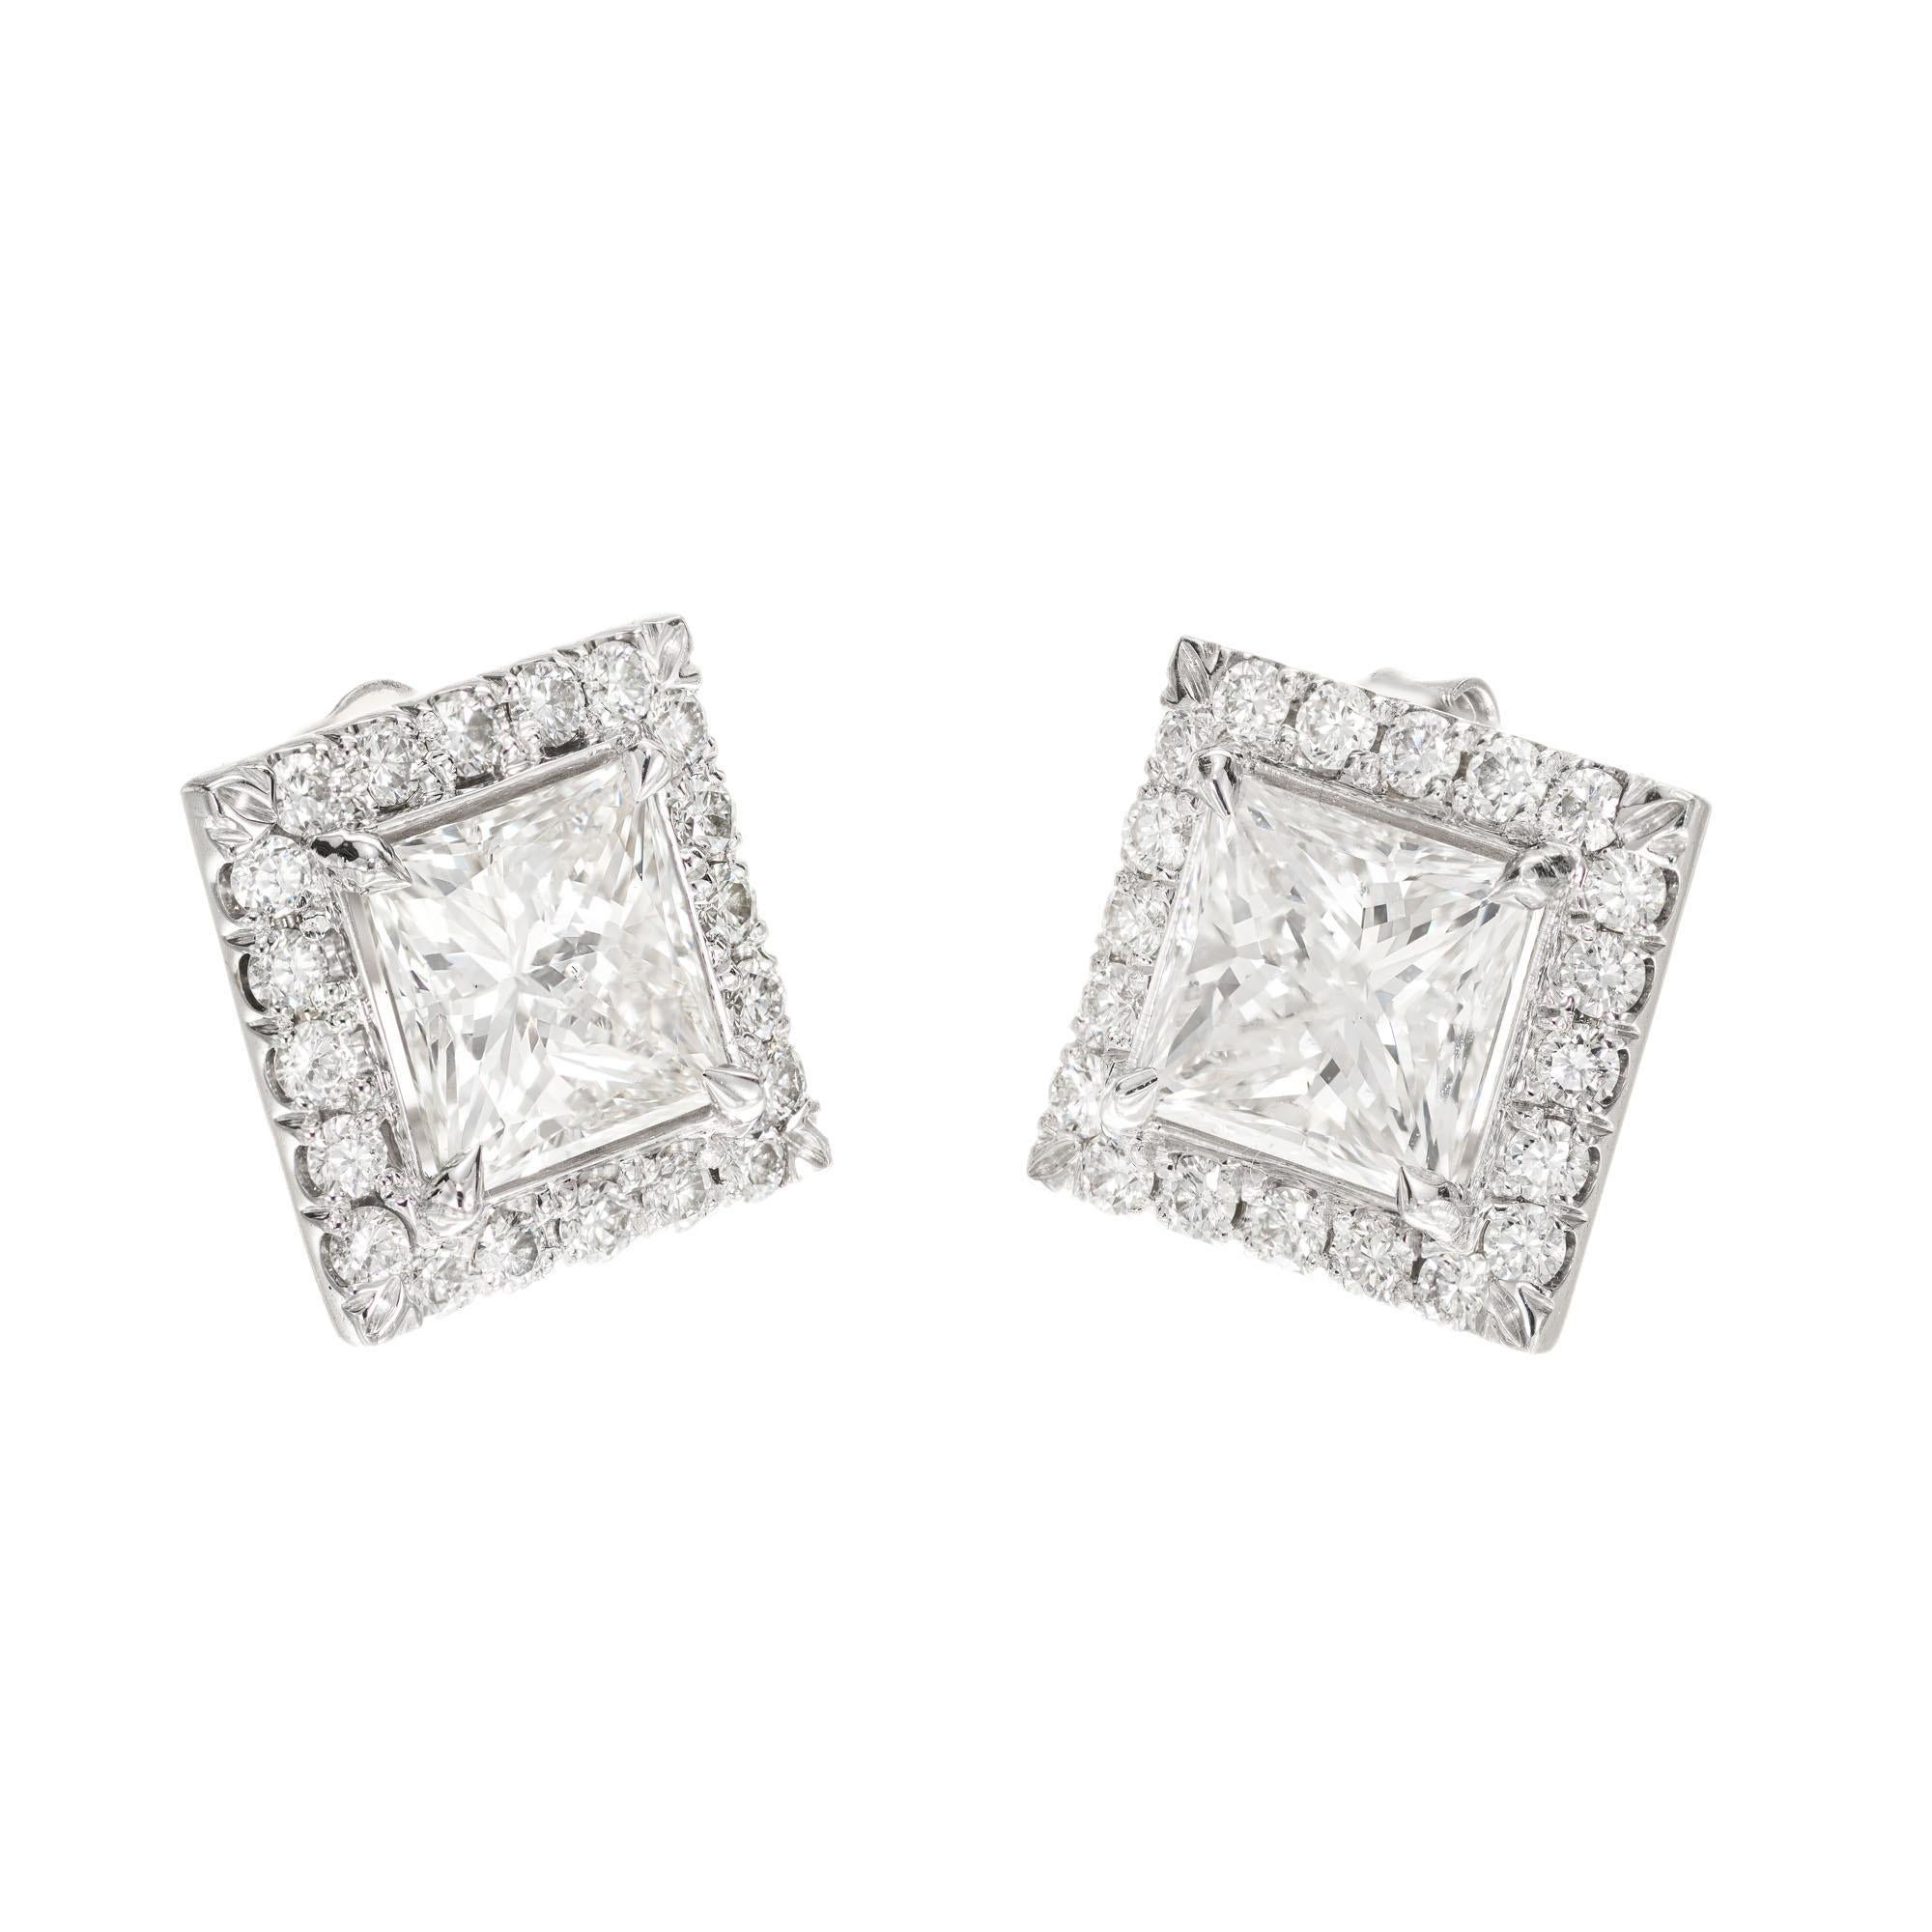 Peter Suchy set princess cut diamond halo earrings. Two square cut diamonds with 40 round brilliant cut diamond halo frames in 18k white gold.

1 square modified brilliant cut diamond, H I approx. 1.20cts GIA certificate # 1126611297
1 square